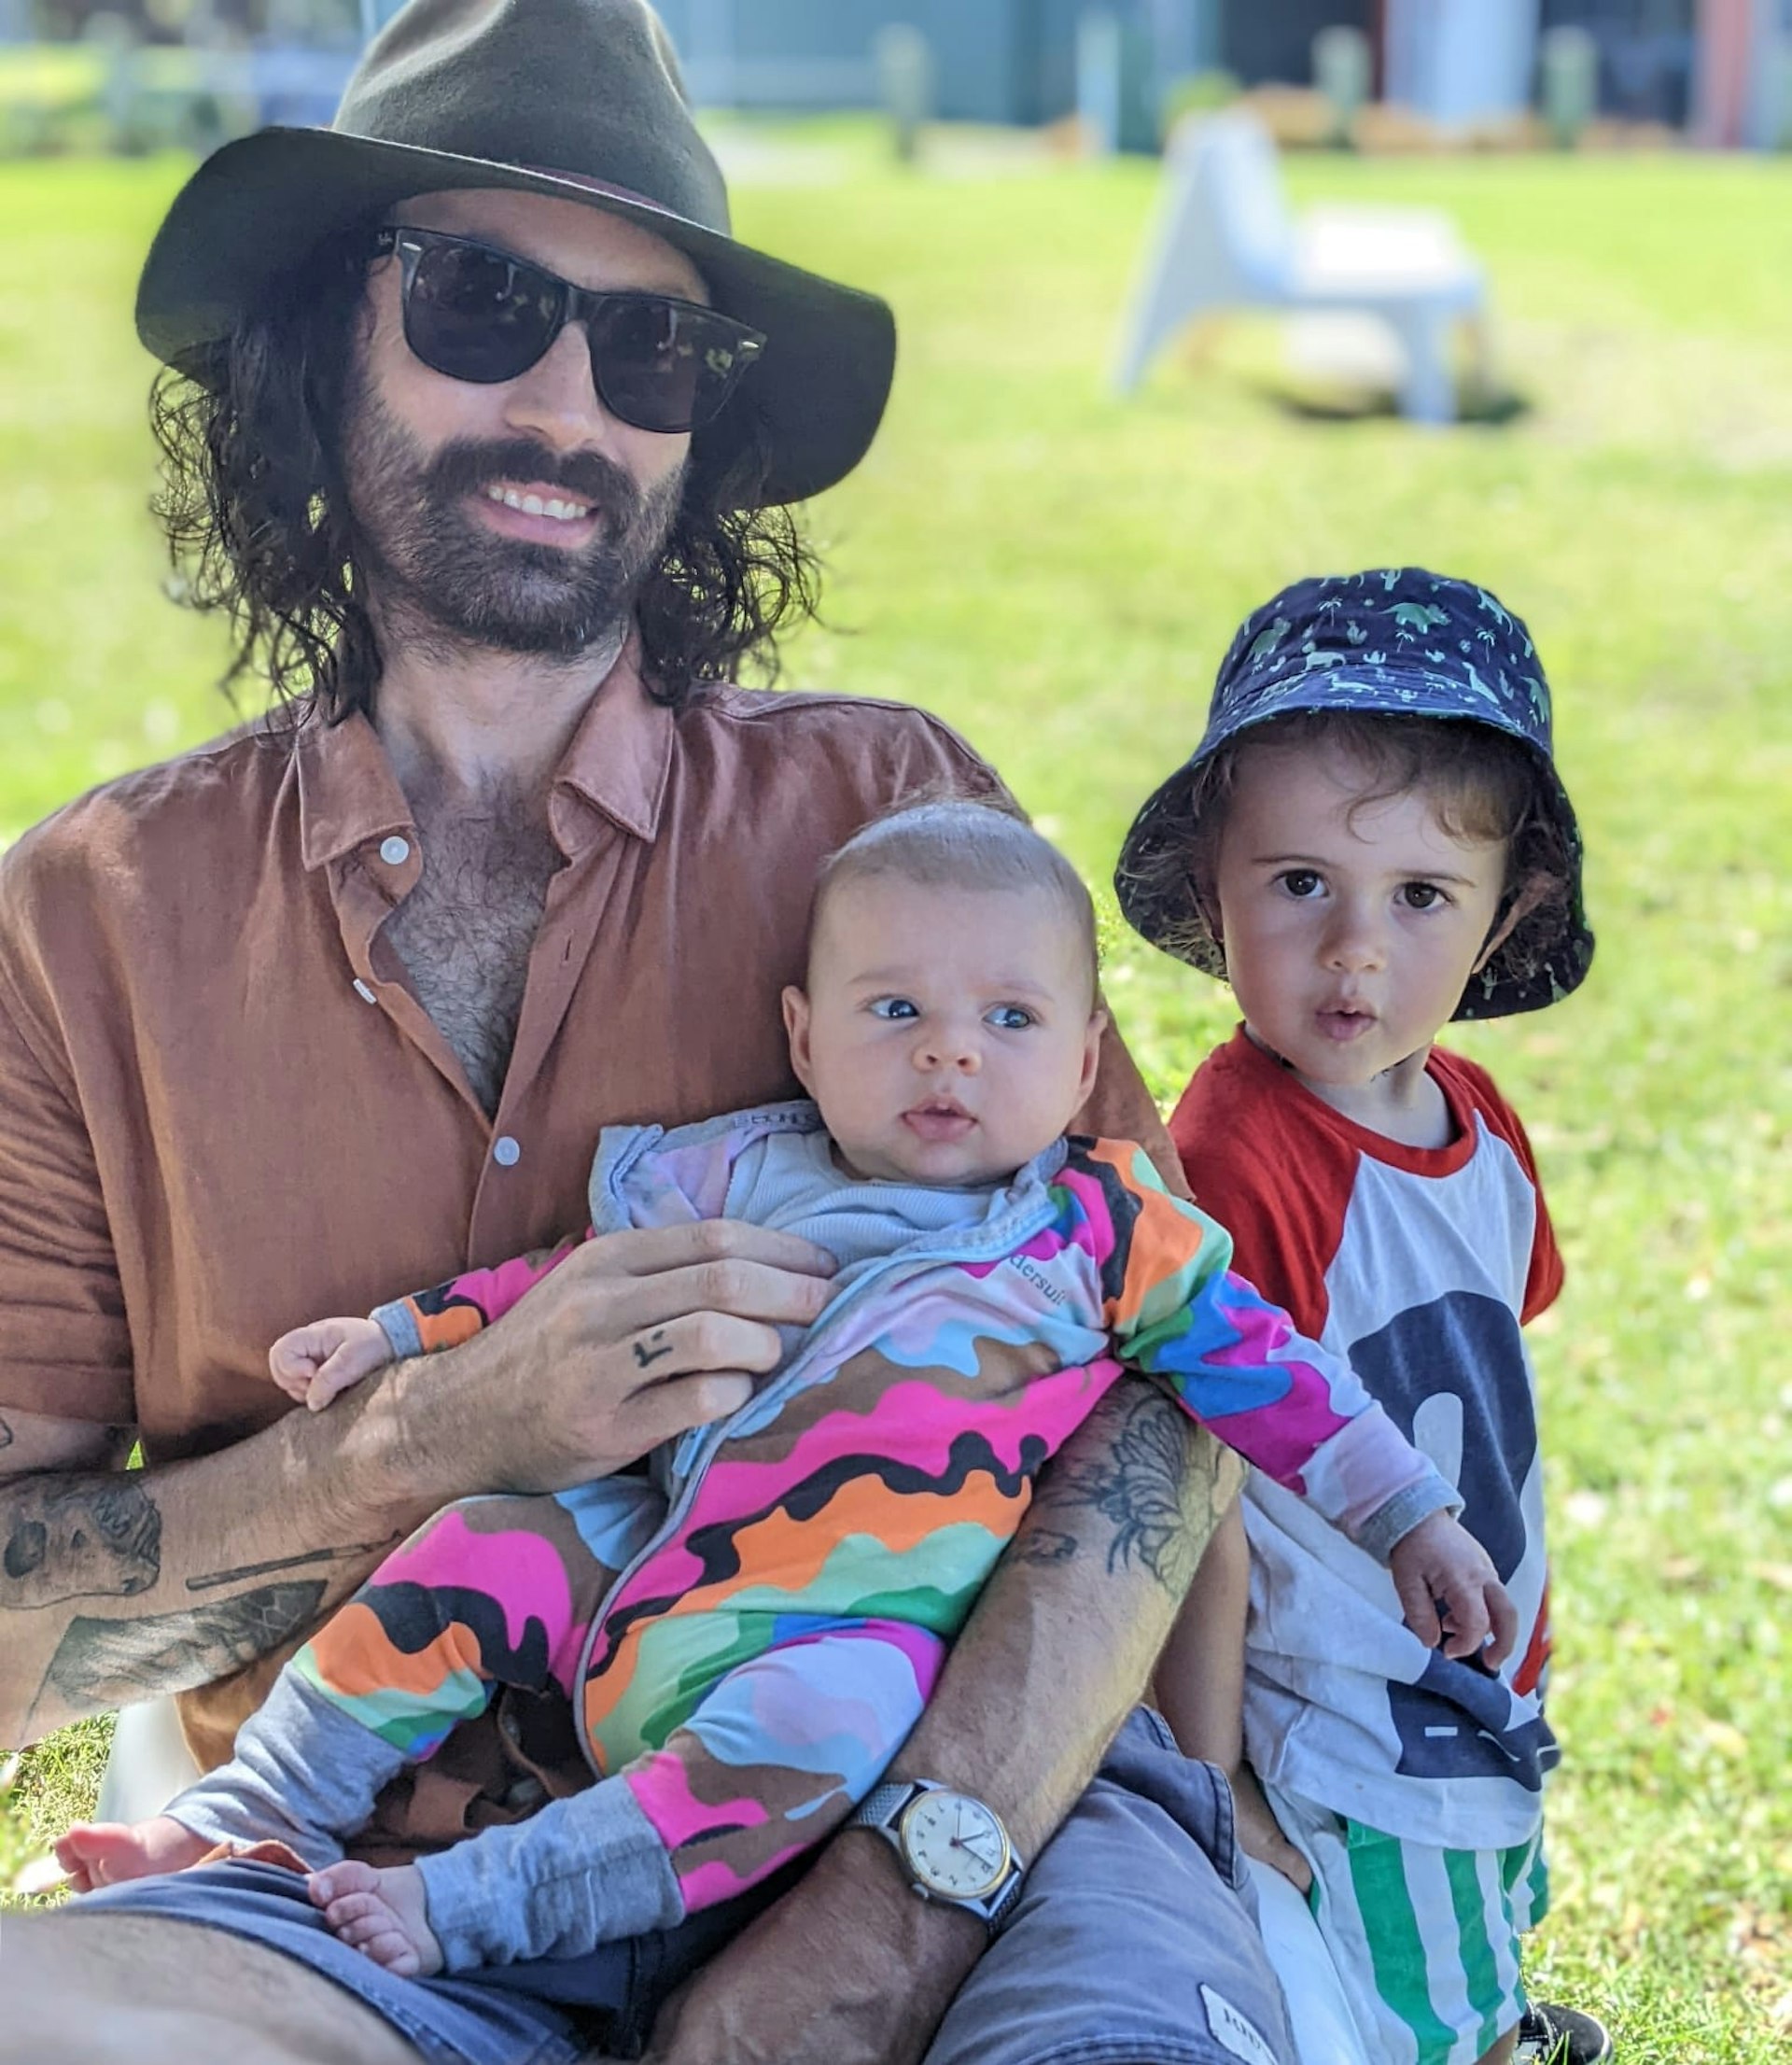 A man wearing a hat and sunglasses sitting down on the grass with his two children